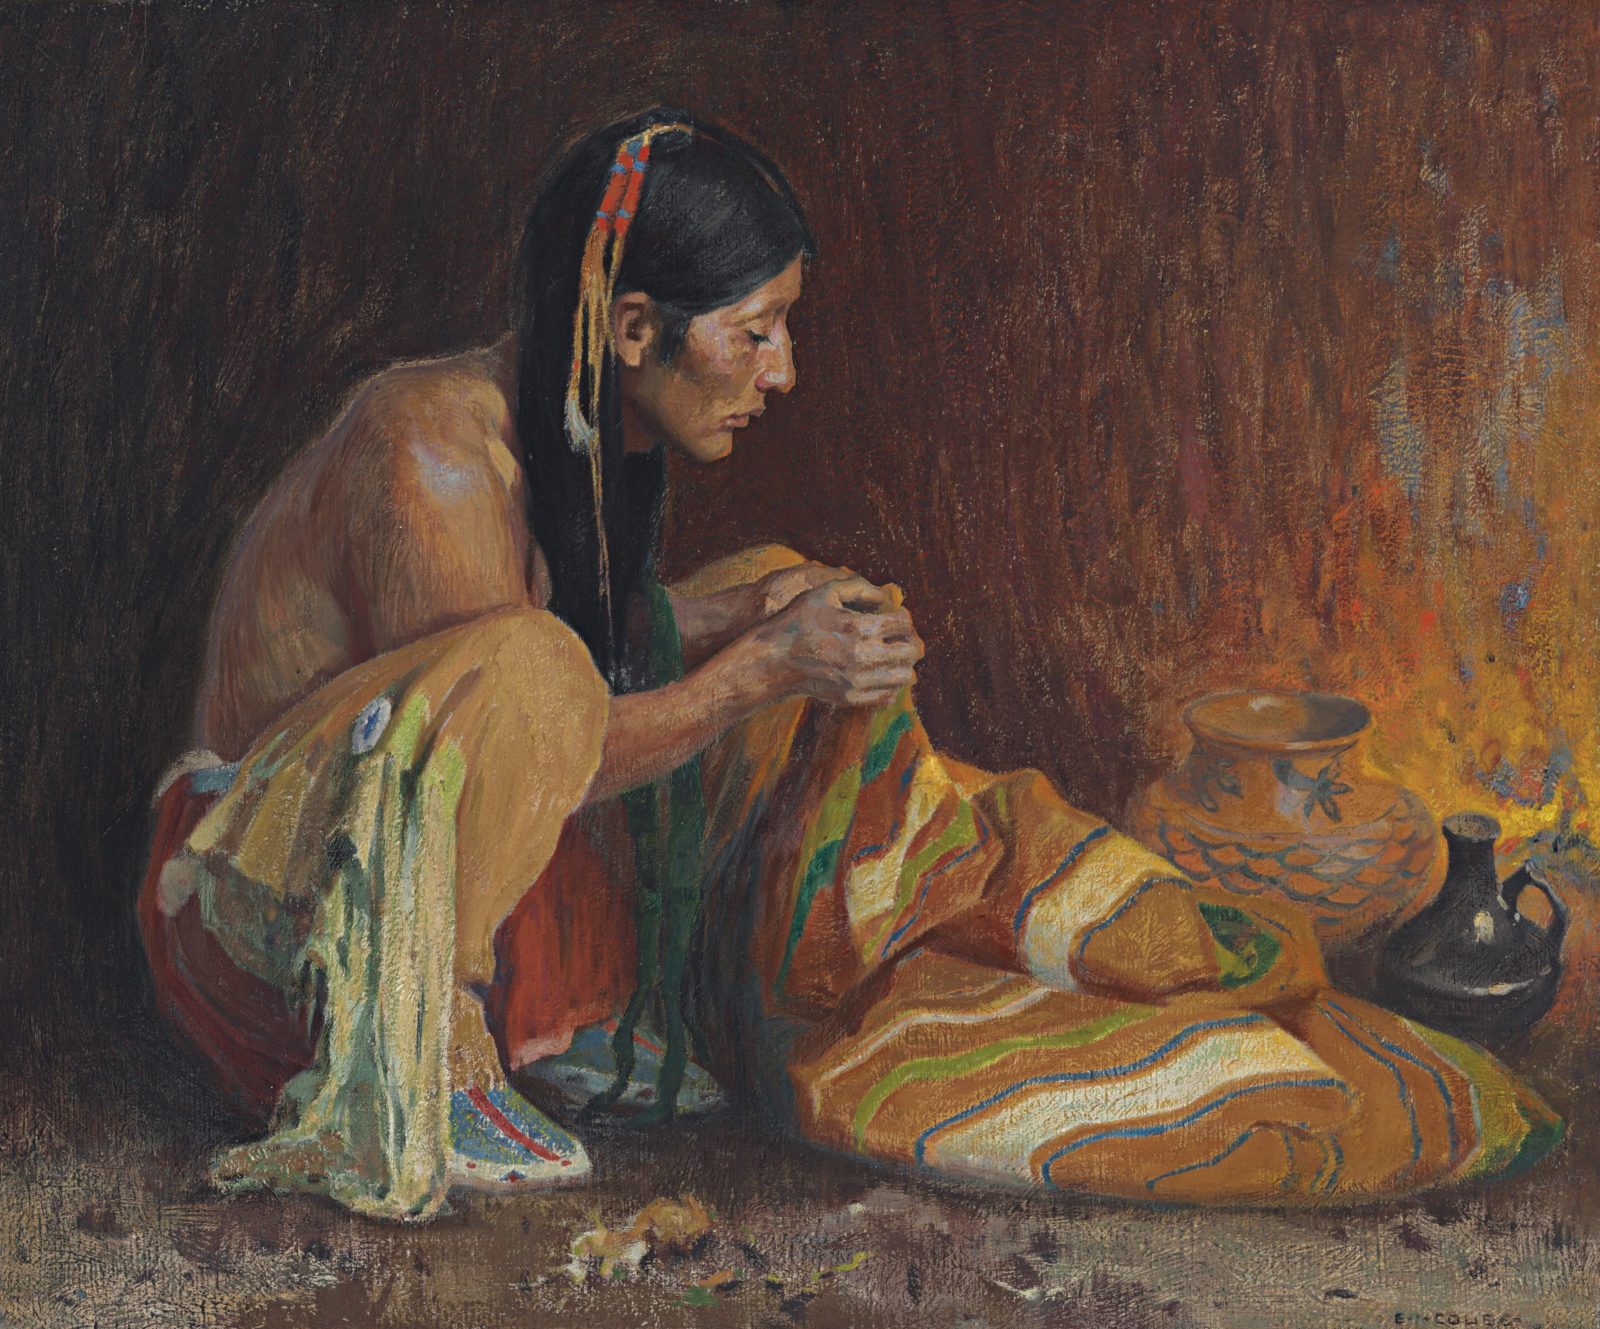 A painting depicting a swatting man weaving a blanket by firelight.